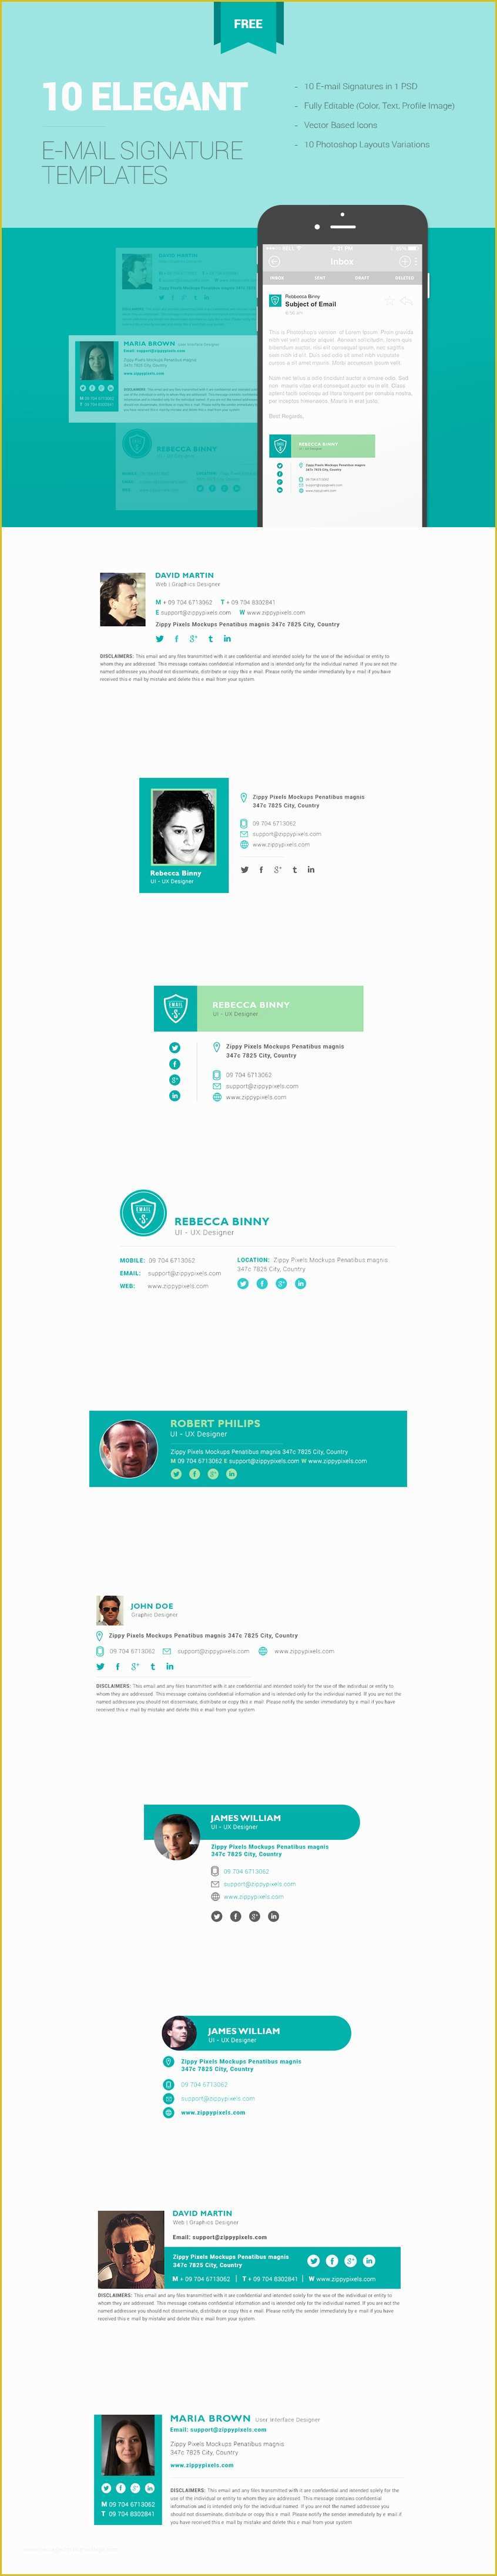 Free Email Signature Psd Template Of 10 Free Email Signature Templates In E Psd